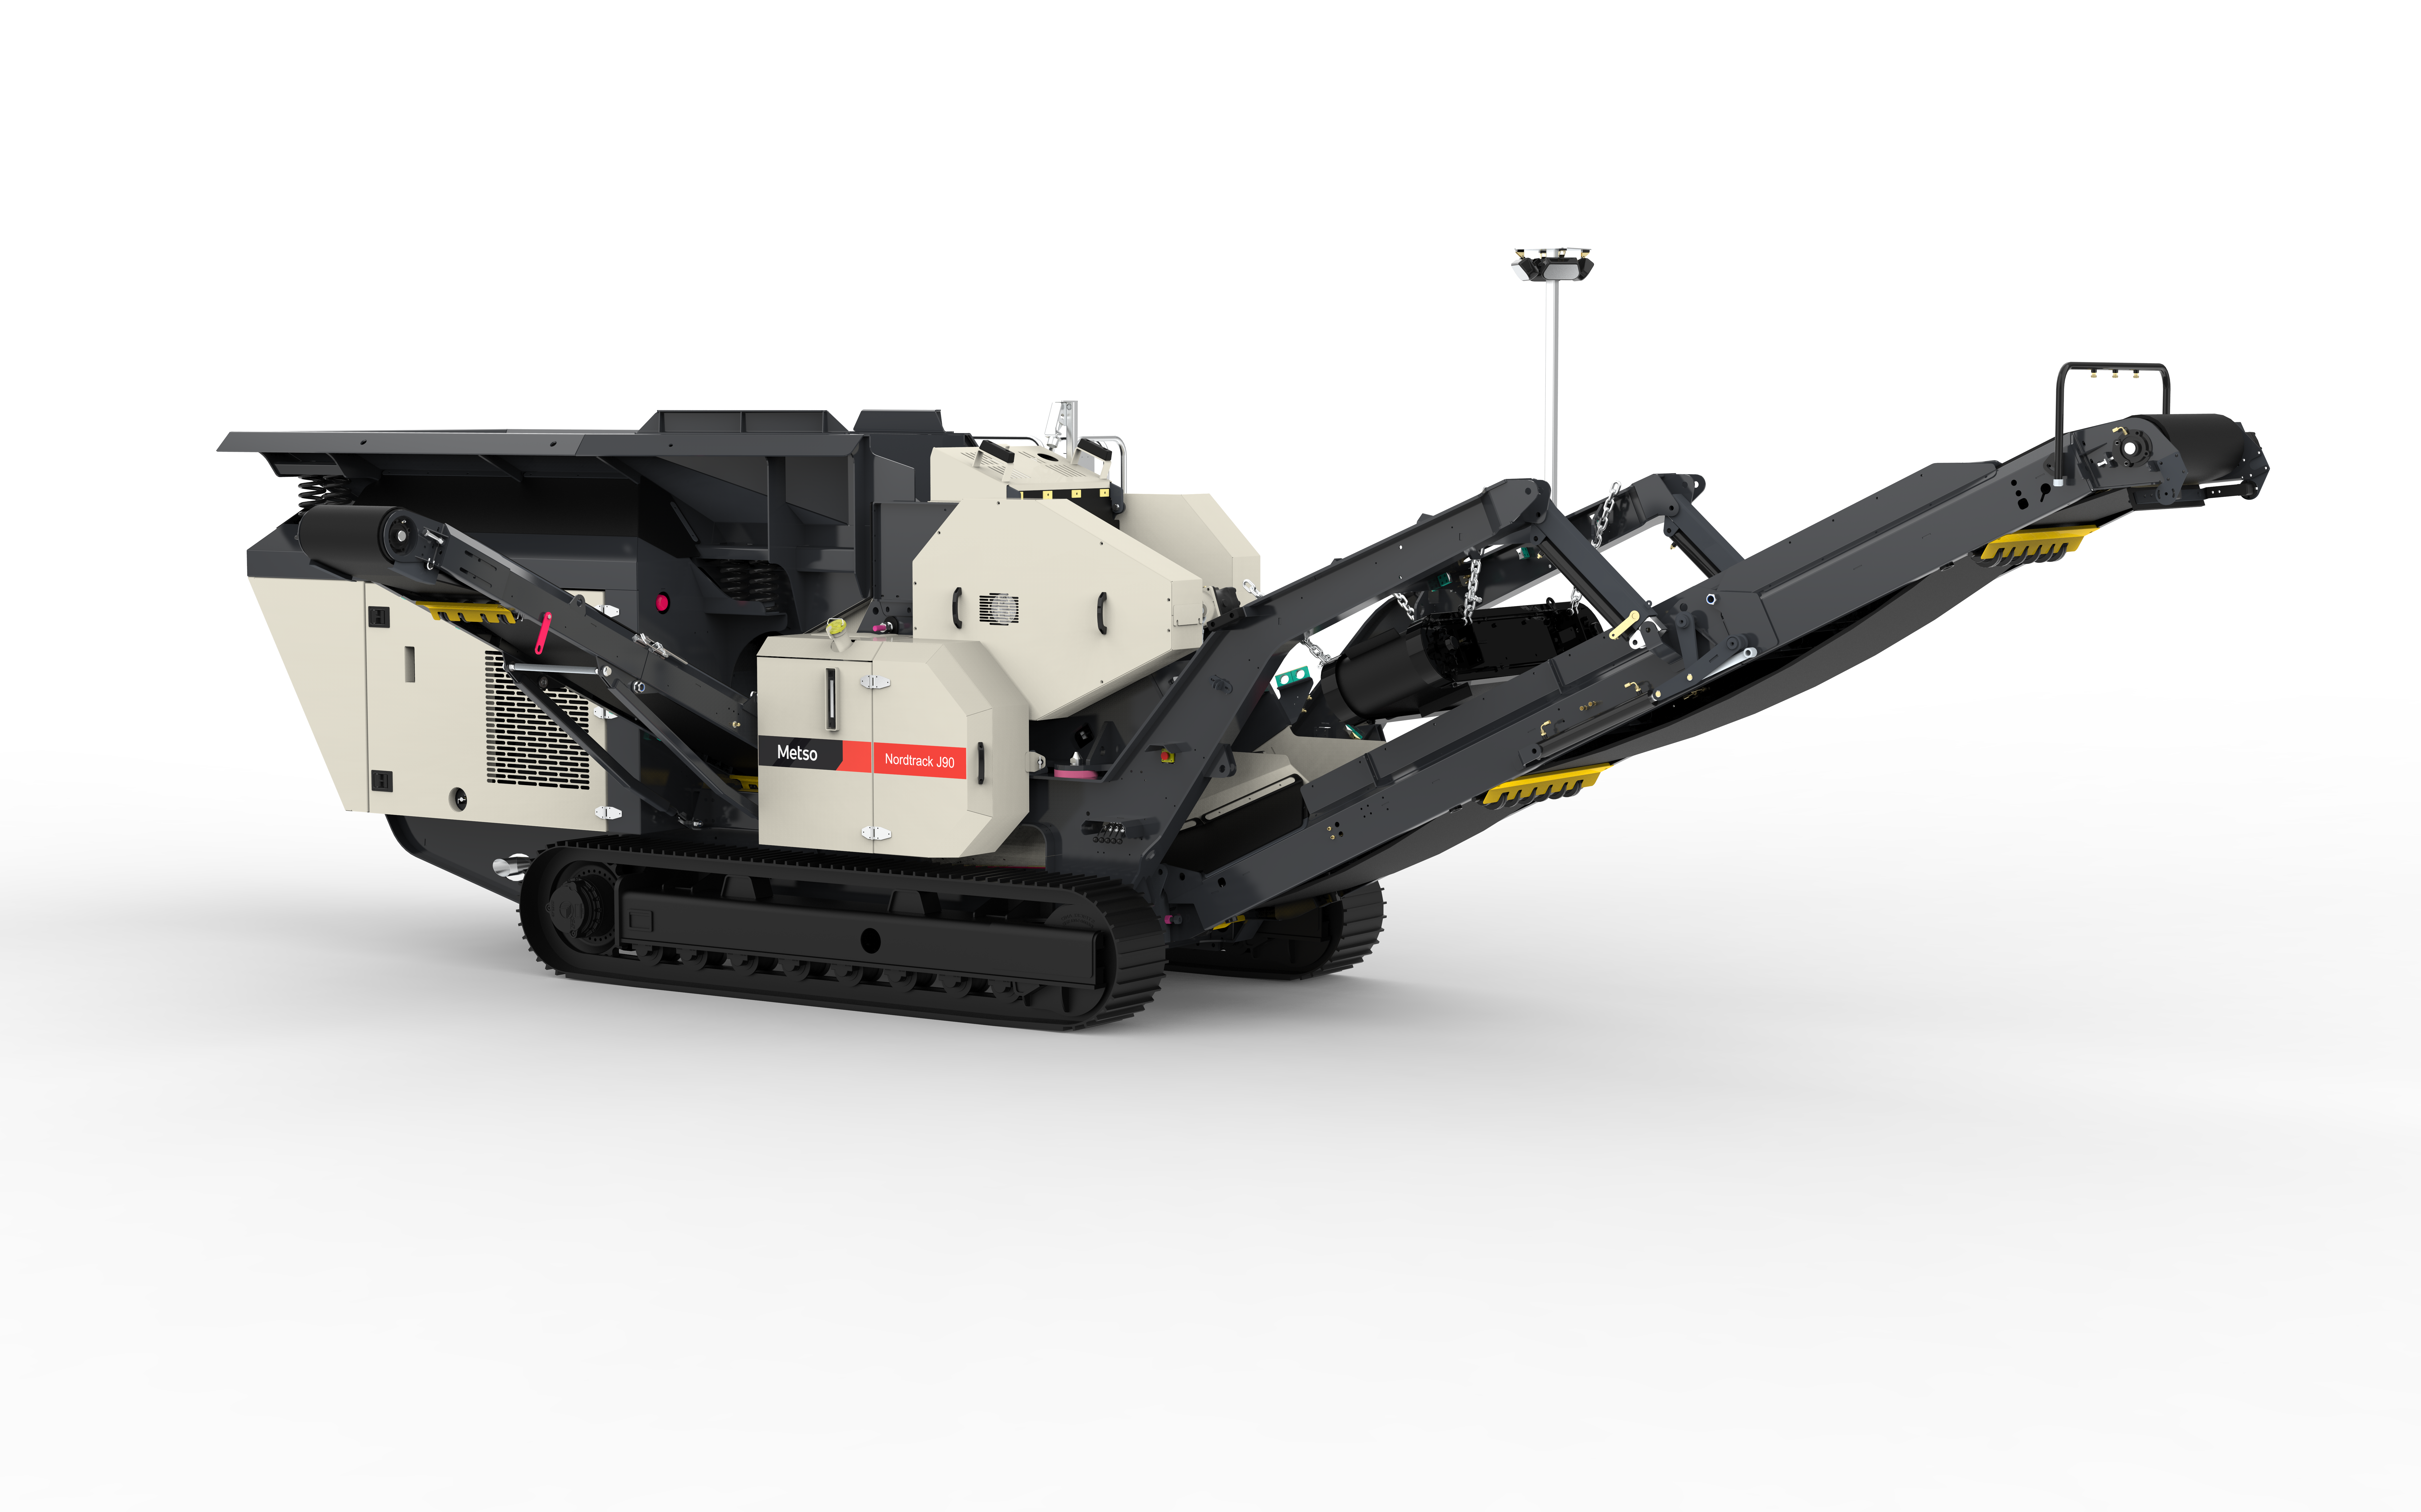 Nordtrack™ J90 mobile jaw crusher delivers excellent crushing performance in a compact and mobile package.